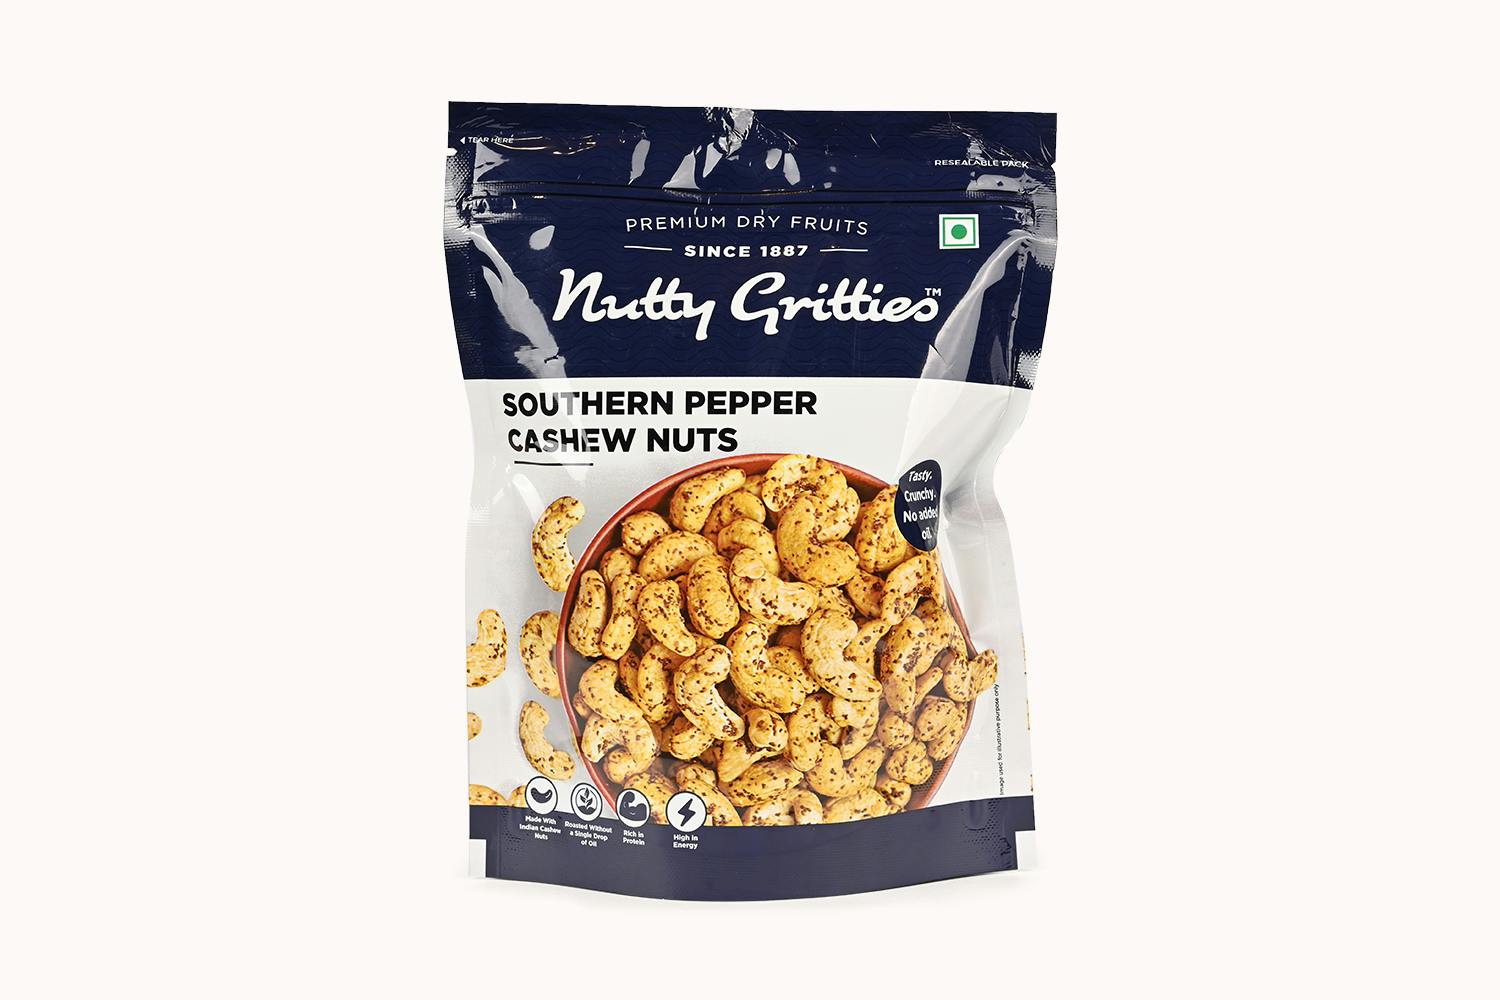 Nutty Gritties Southern Pepper Cashew Nuts